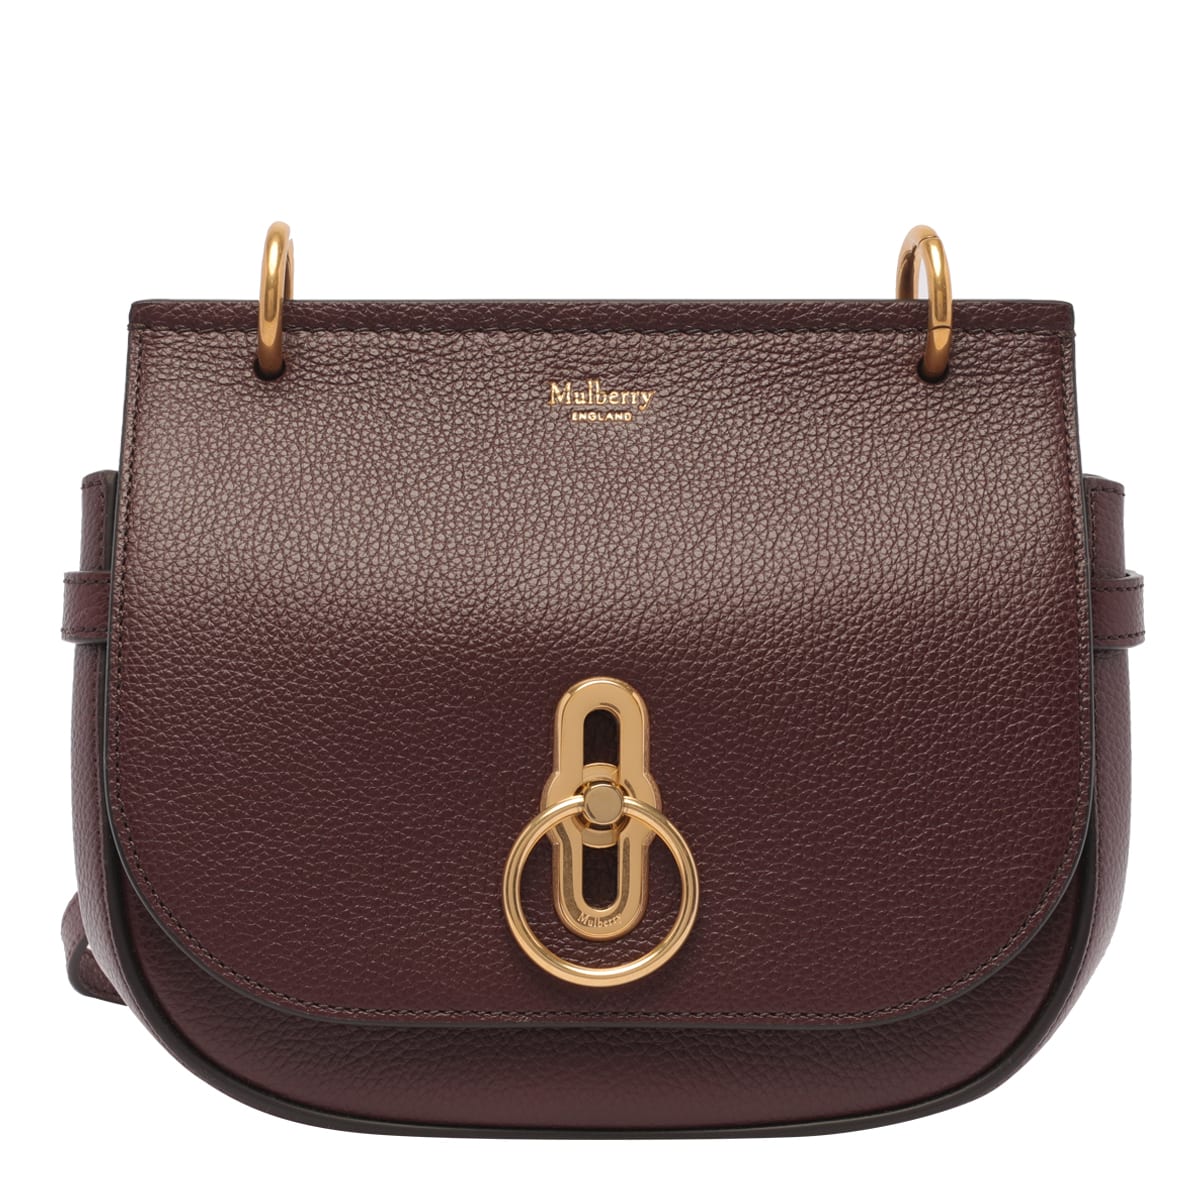 MULBERRY SMALL AMBERLEY SATCHEL CLASSIC BAG